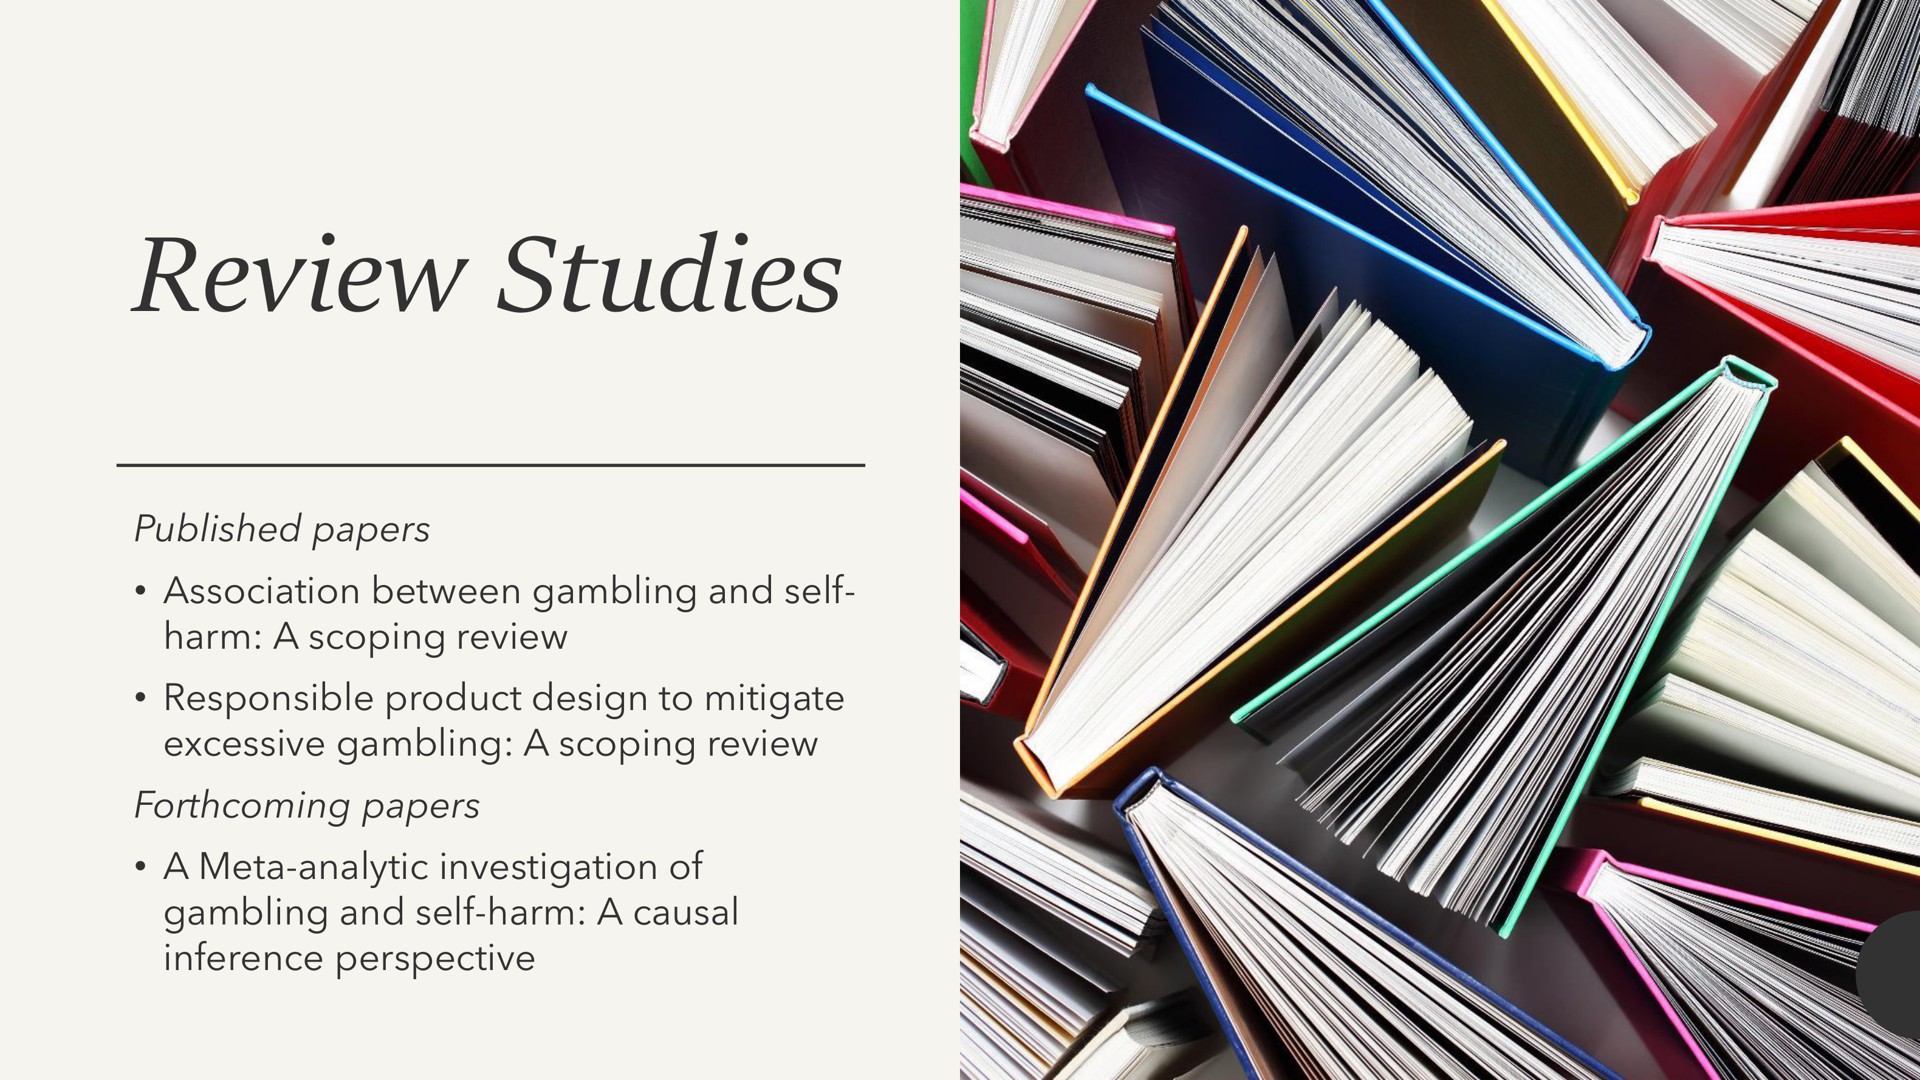 review studies | Entain Group